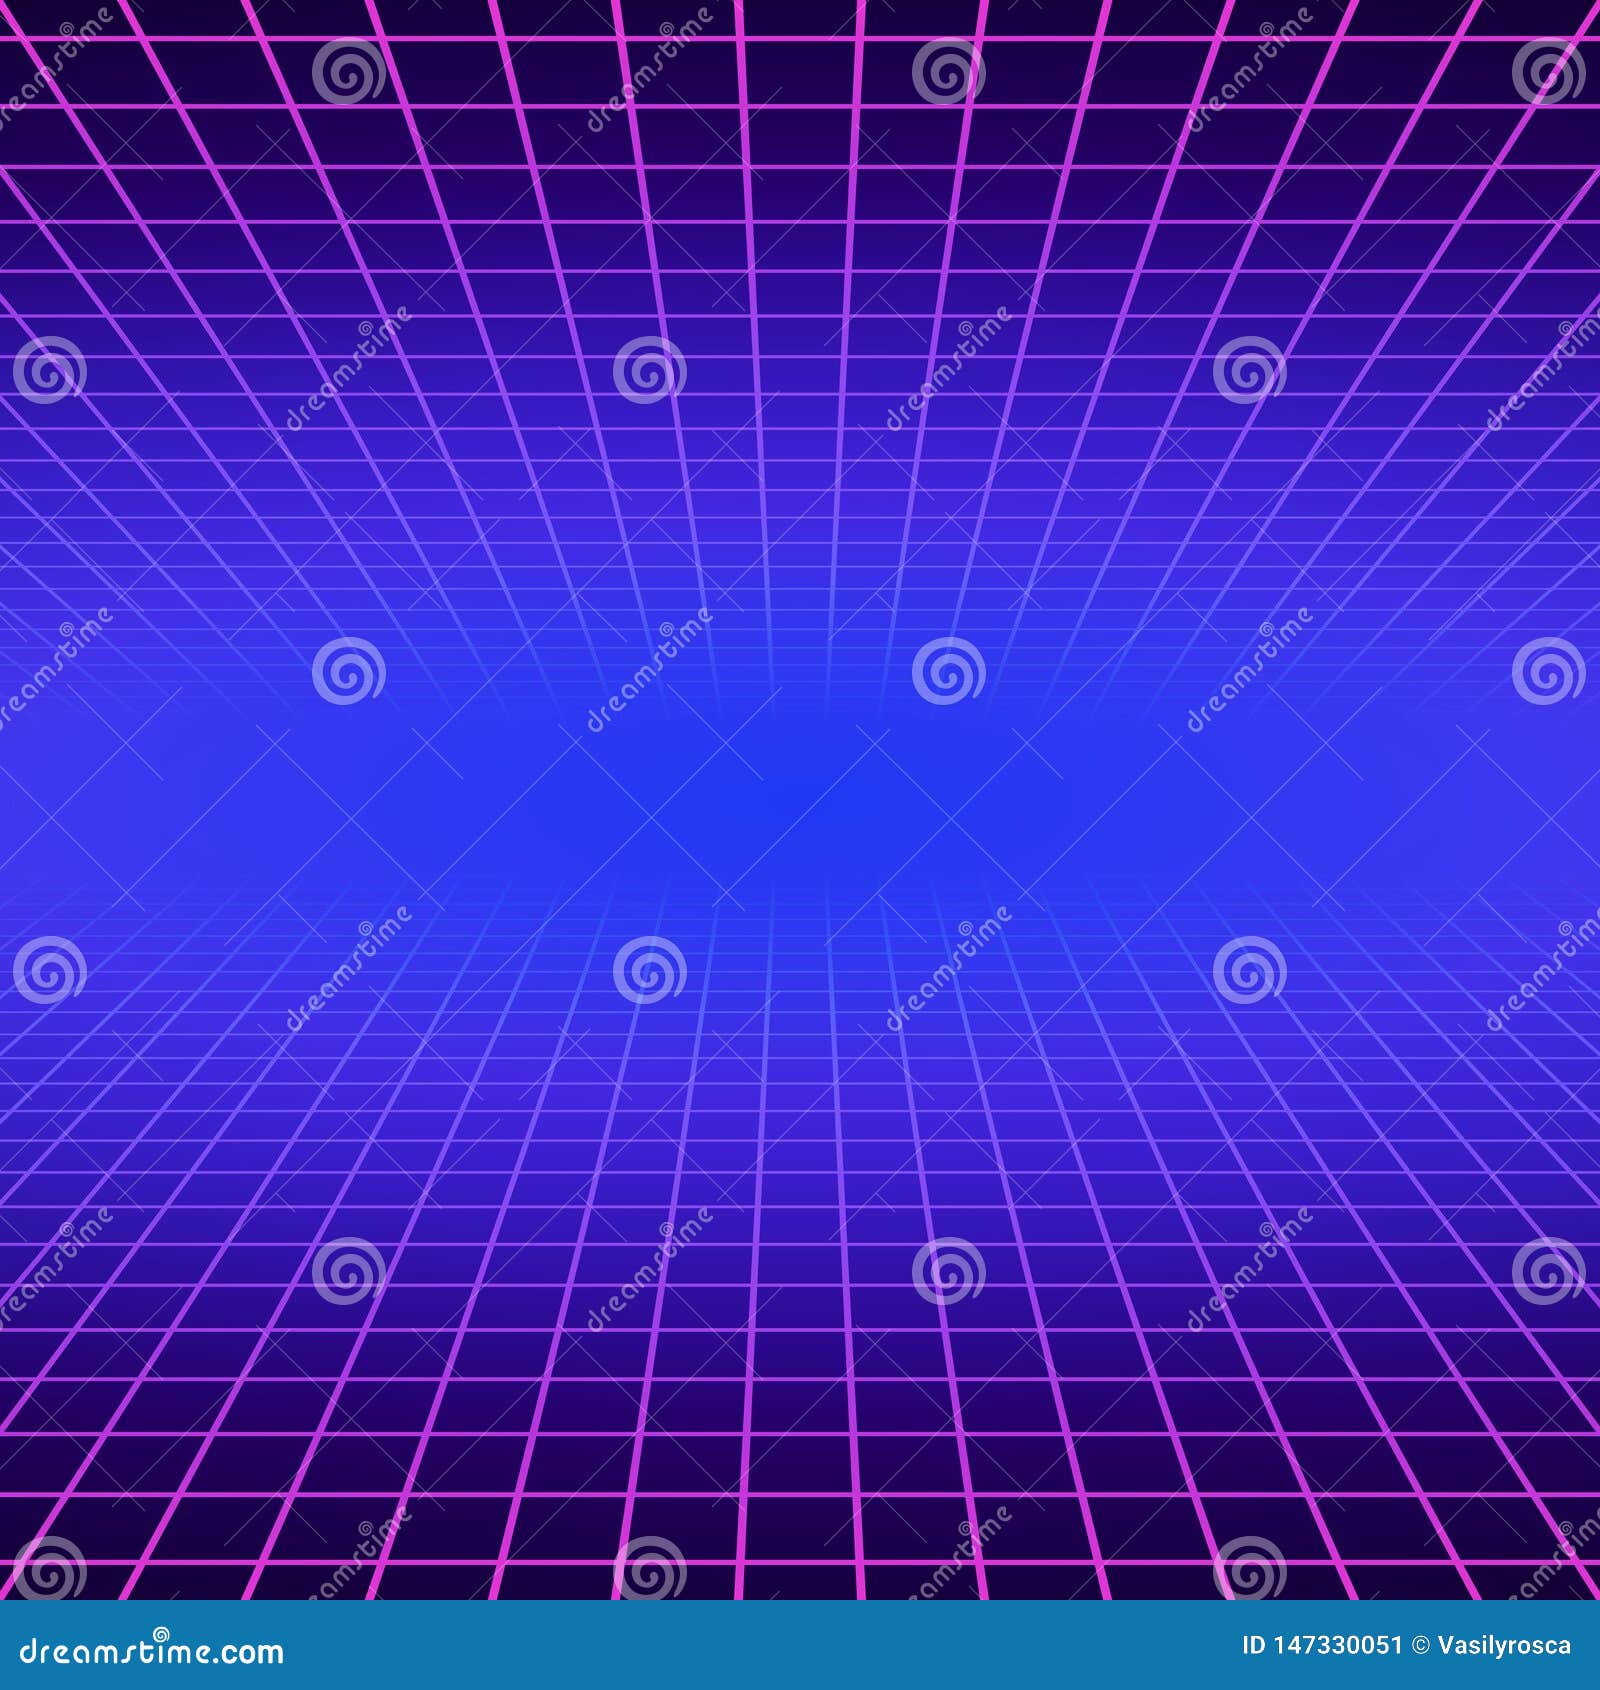 synth wave retro grid background. synthwave 80s vapor  game poster neon futuristic laser space arcade